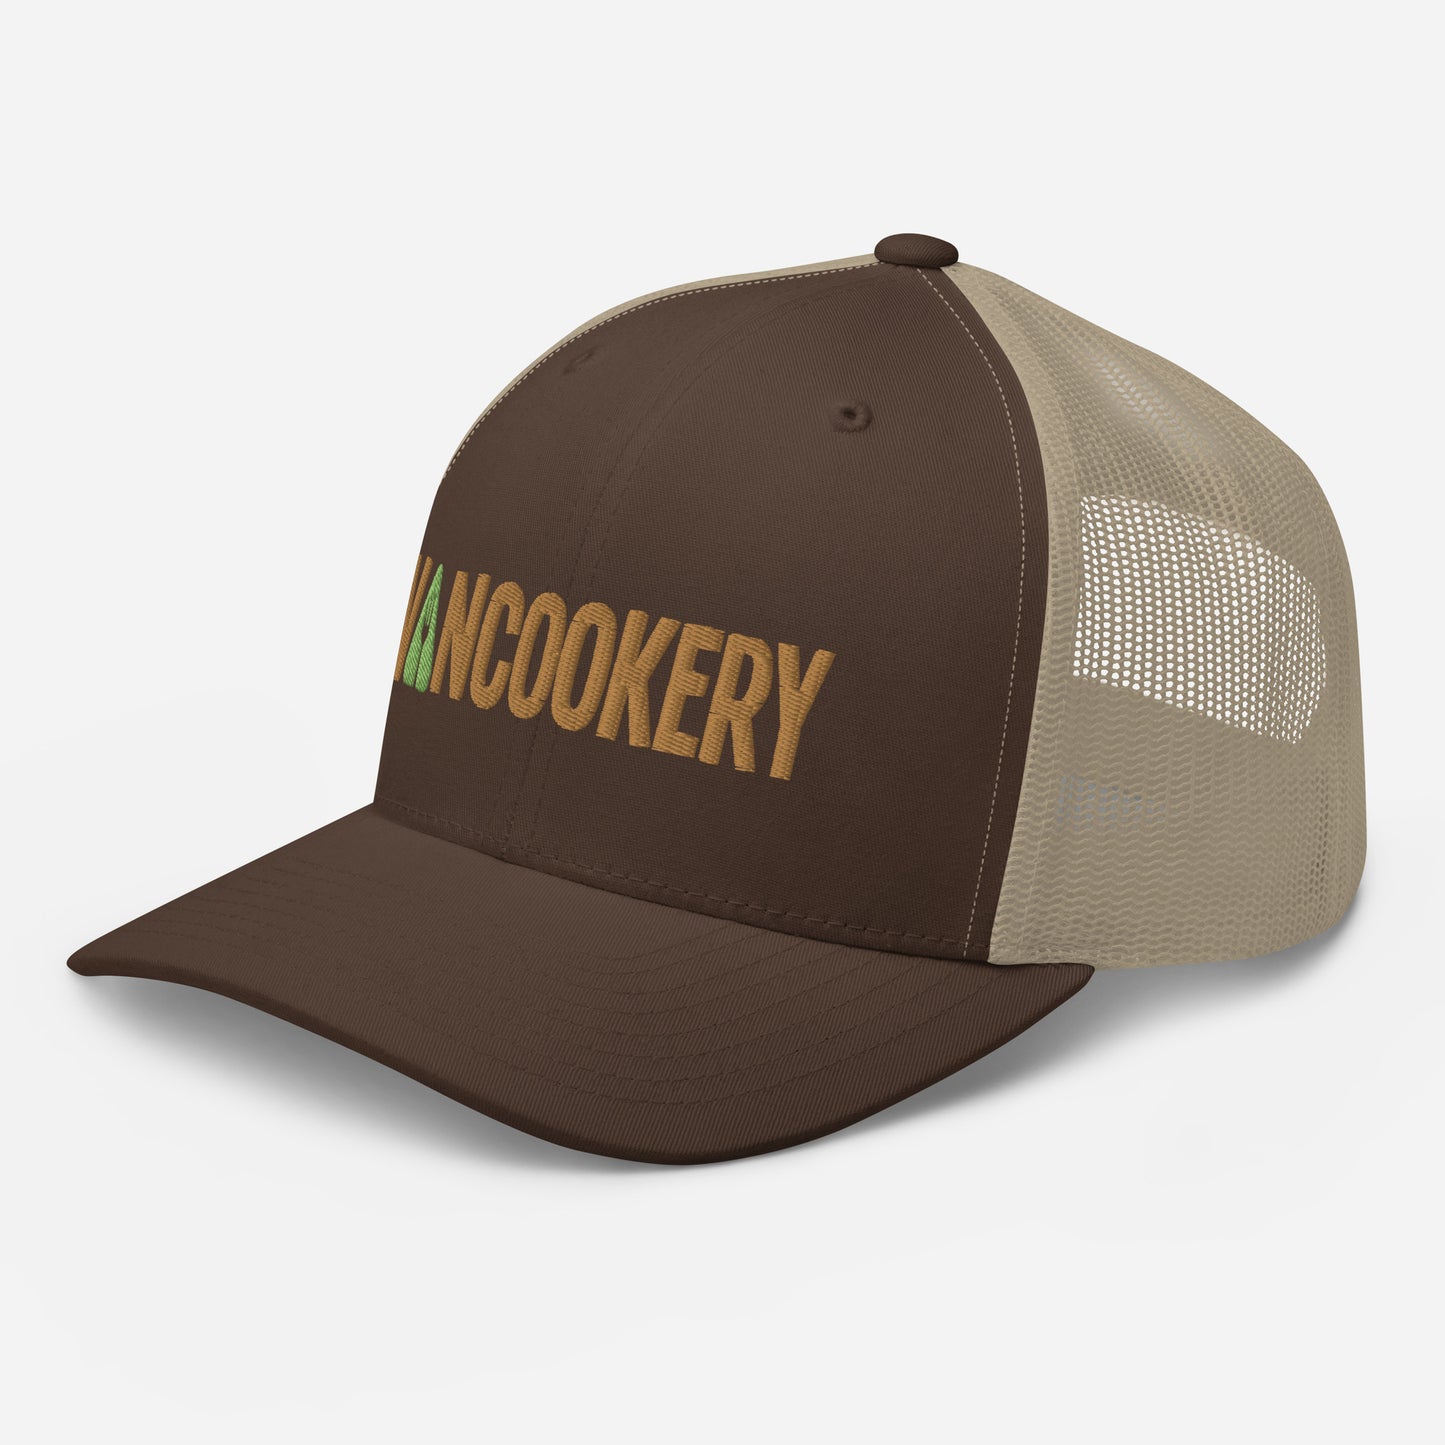 Vancookery Chef Hat: Because Your Hair Doesn't Belong in the Soup